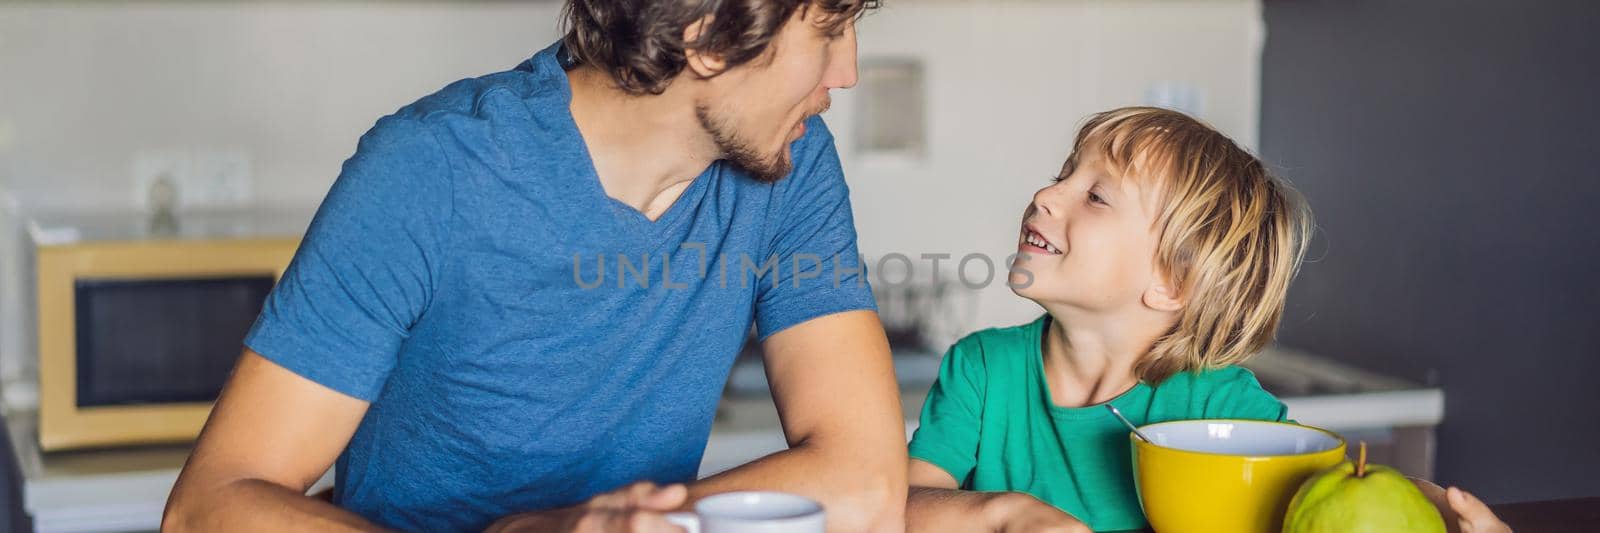 Father and son are talking and smiling while having a breakfast in kitchen BANNER, LONG FORMAT by galitskaya